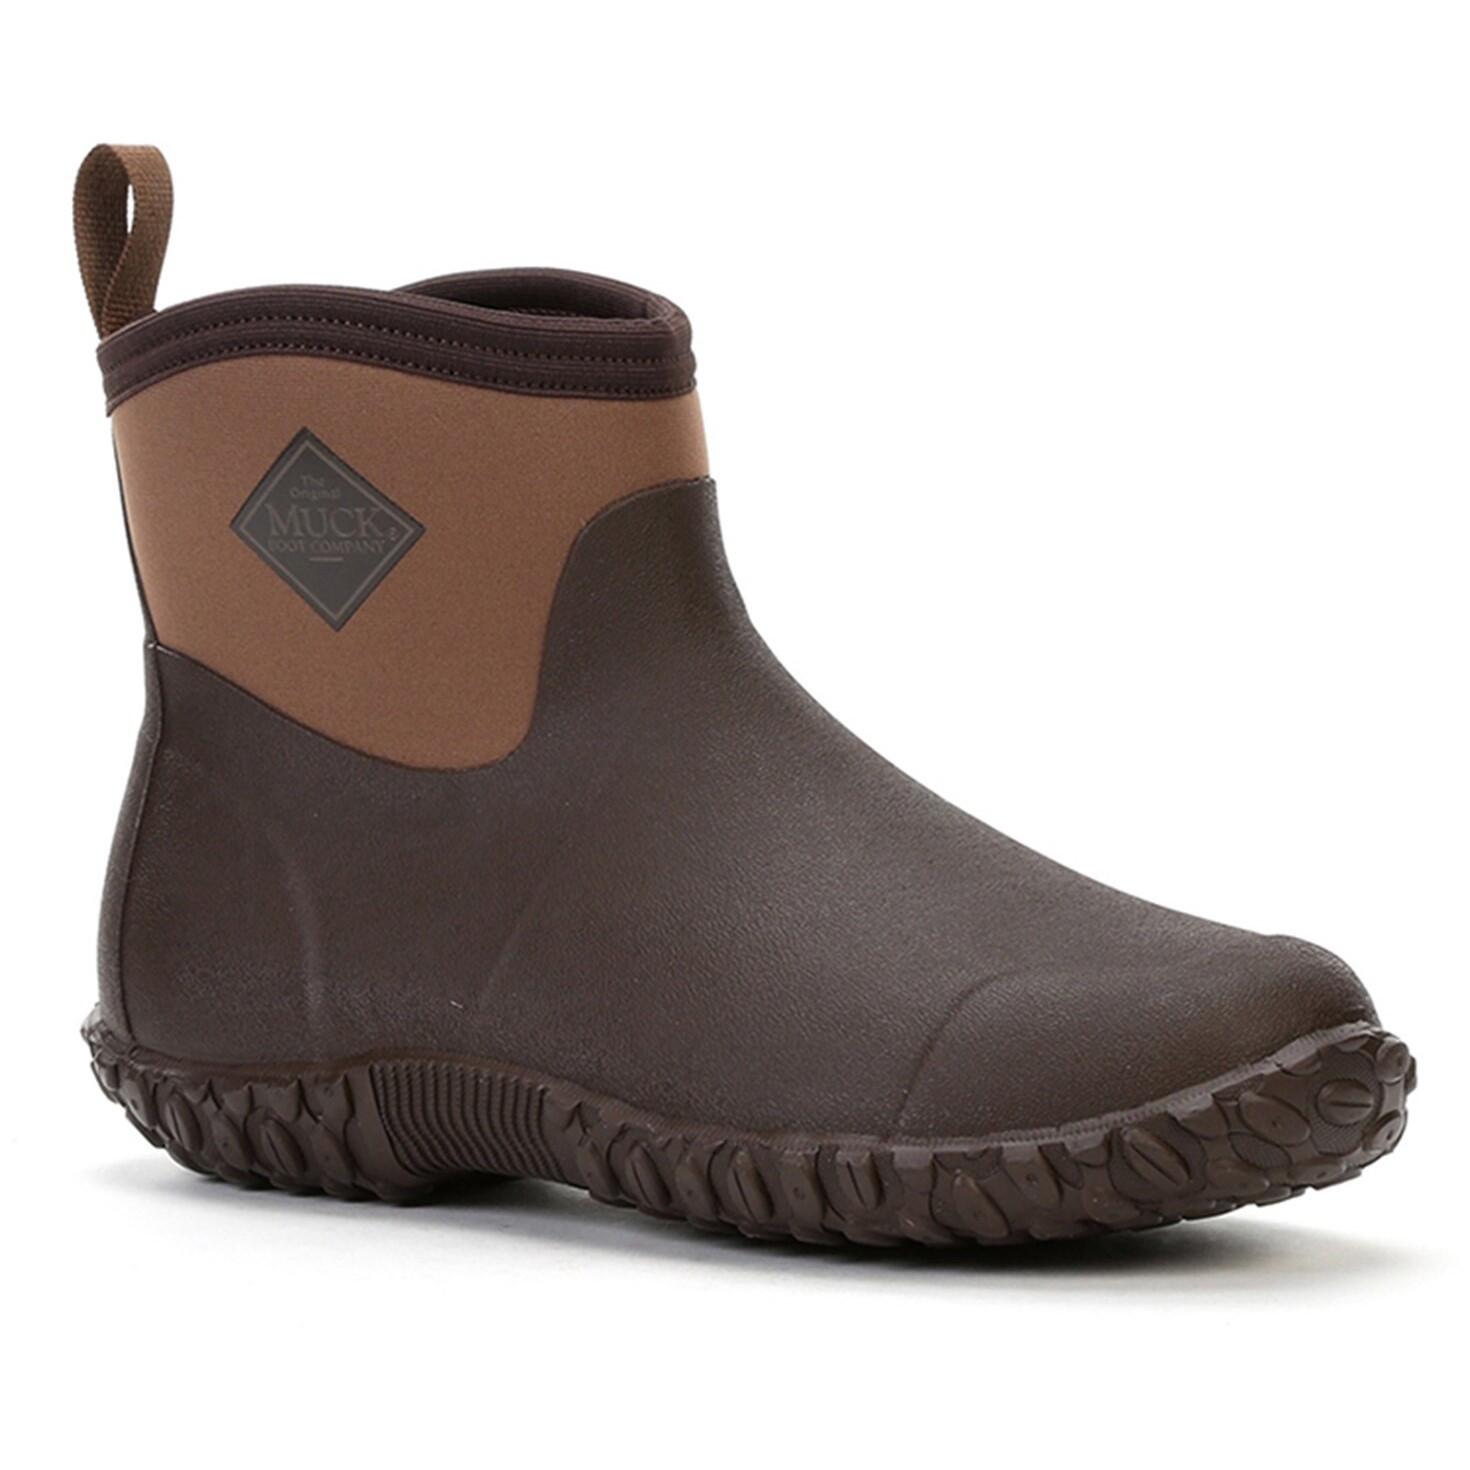 Muckster II Ankle Textile/Weather Wellingtons BROWN 2/5